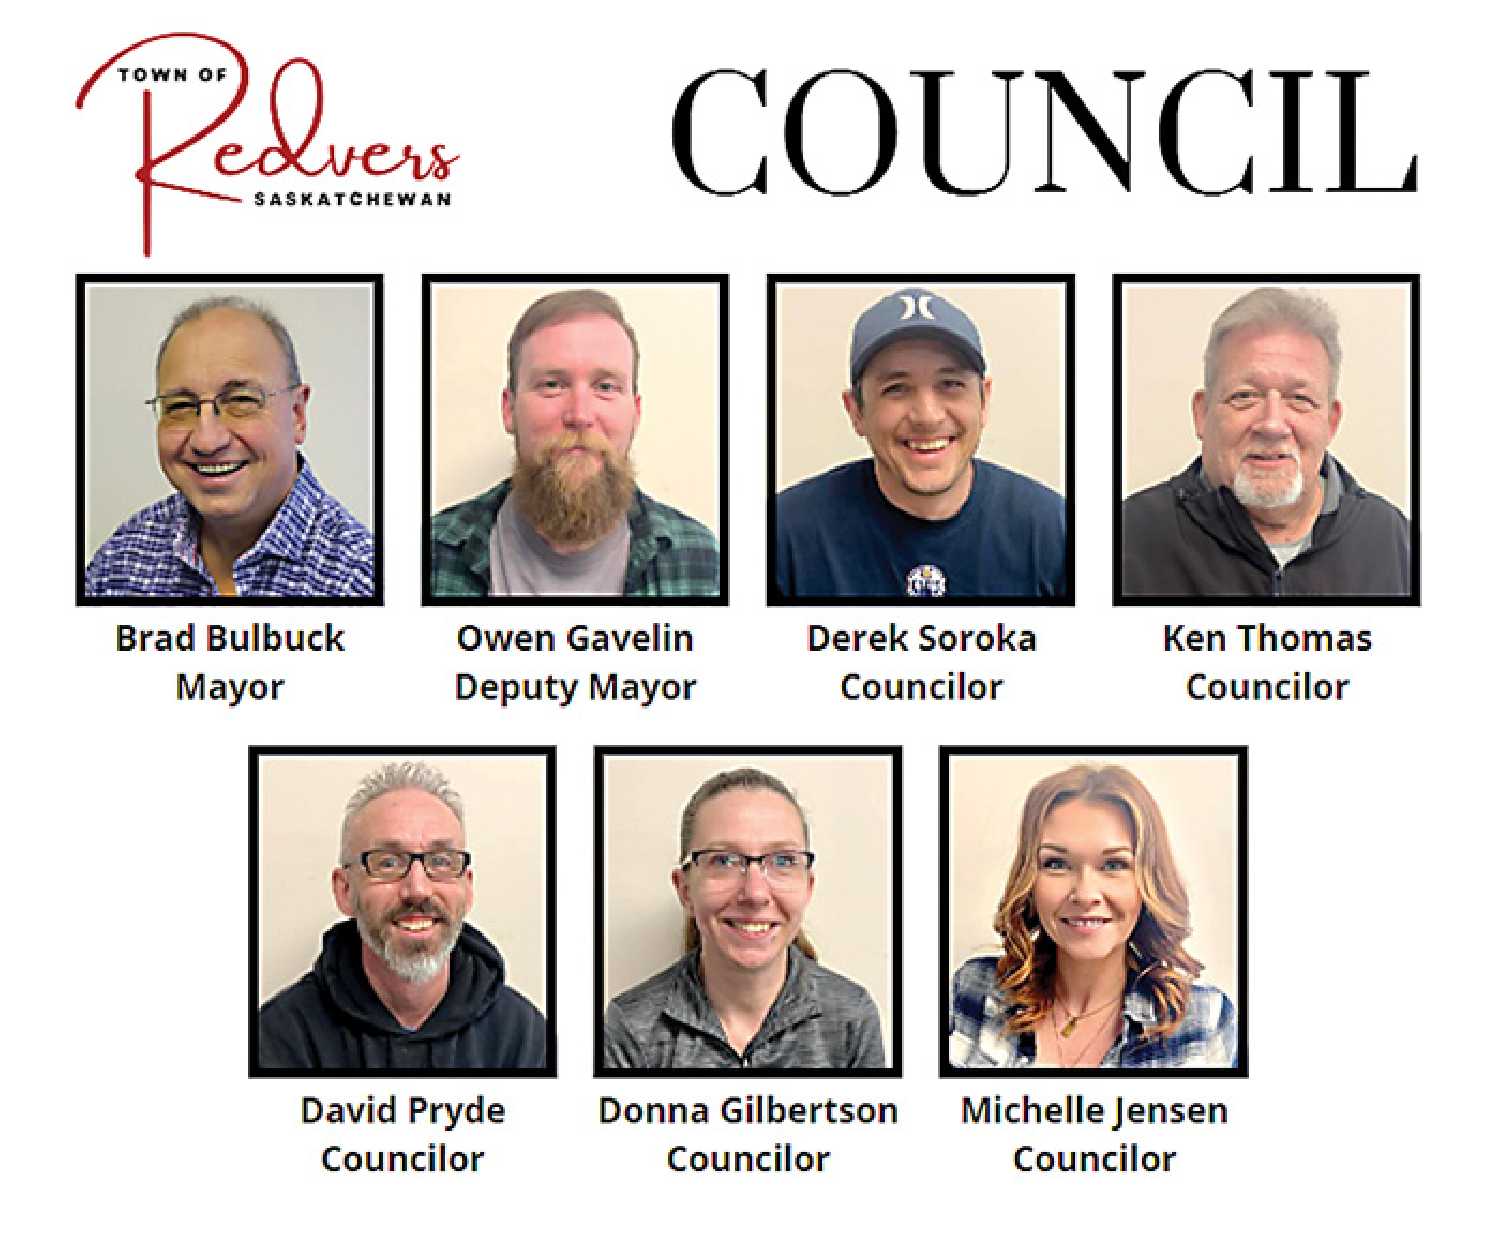 The Mayor of Redvers, Brad Bullbuck, said the town and staff have been working hard in organizing projects and applying for grants to help the town grow.